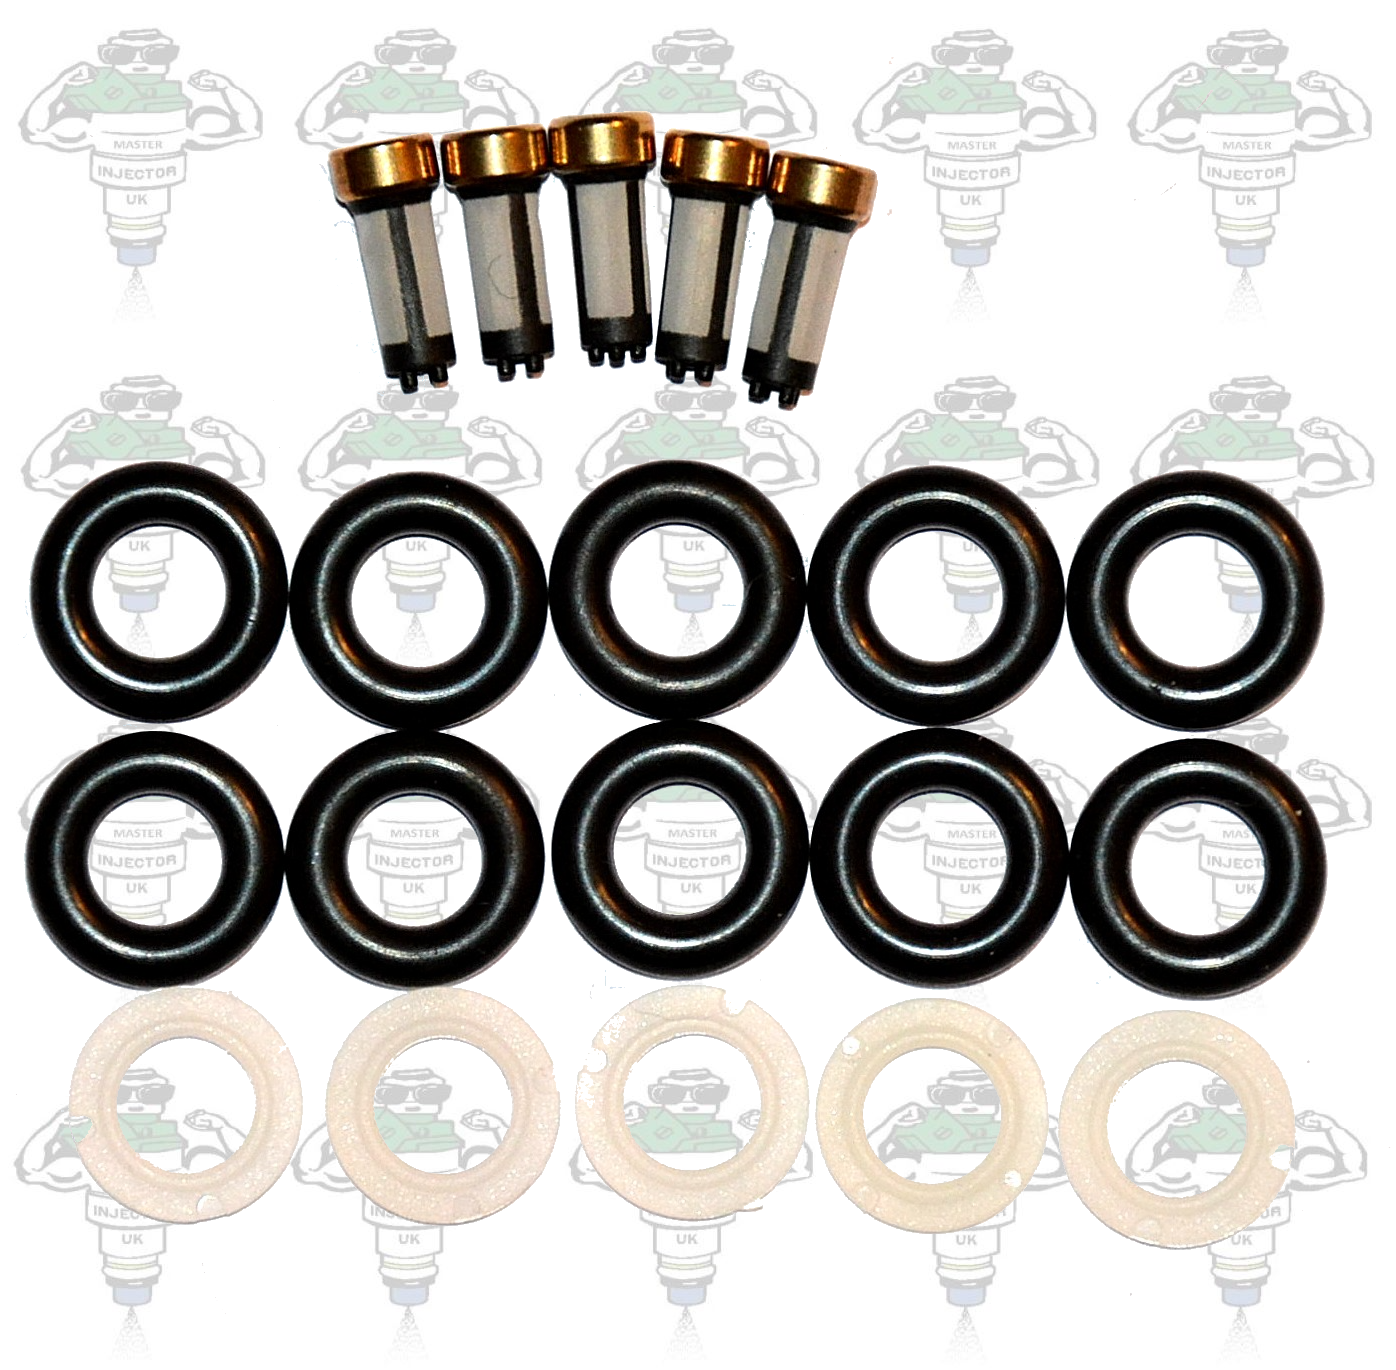 Seal Kit 100 for 5 Cylinder Volvo Compatible With Bosch 0280155 0280156